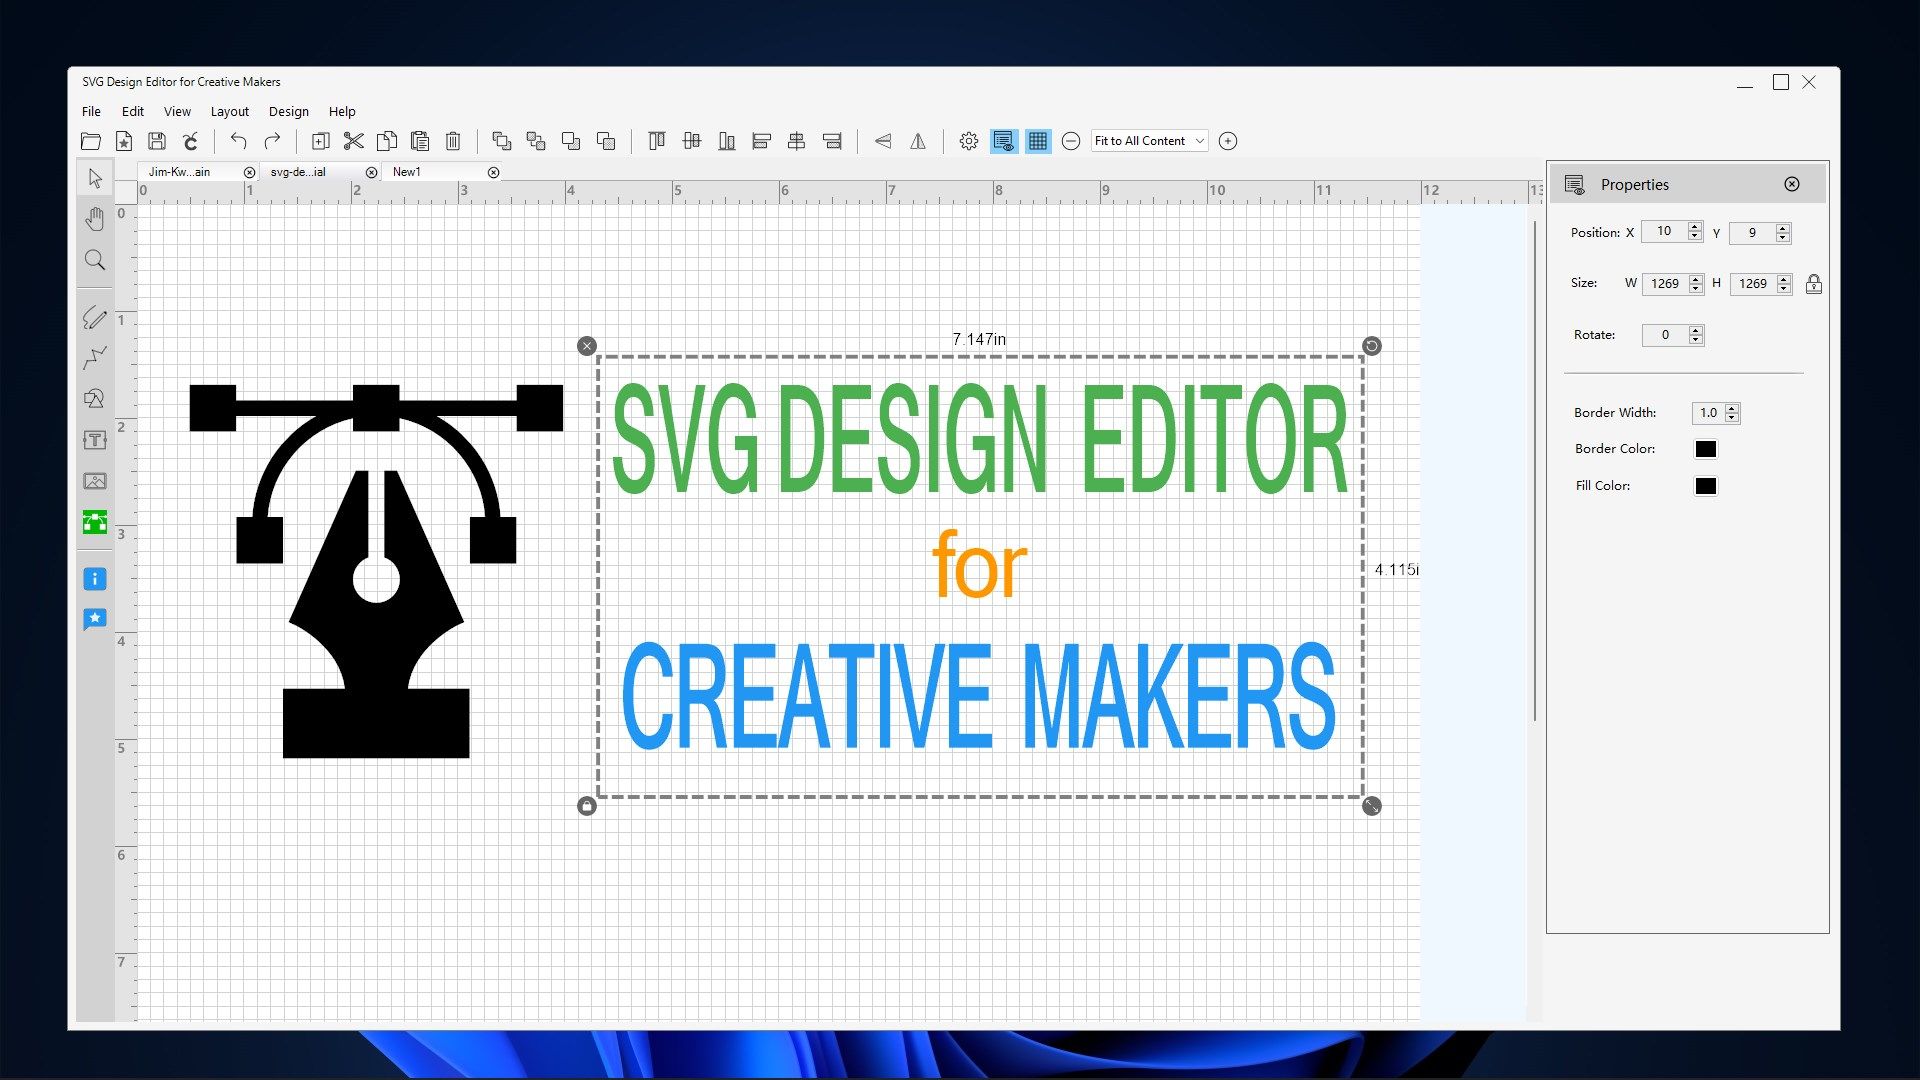 SVG Design Editor for Creative Makers can either be used as a standalone vector based design canvas software or as a companion app along with Cricut Design Space©.